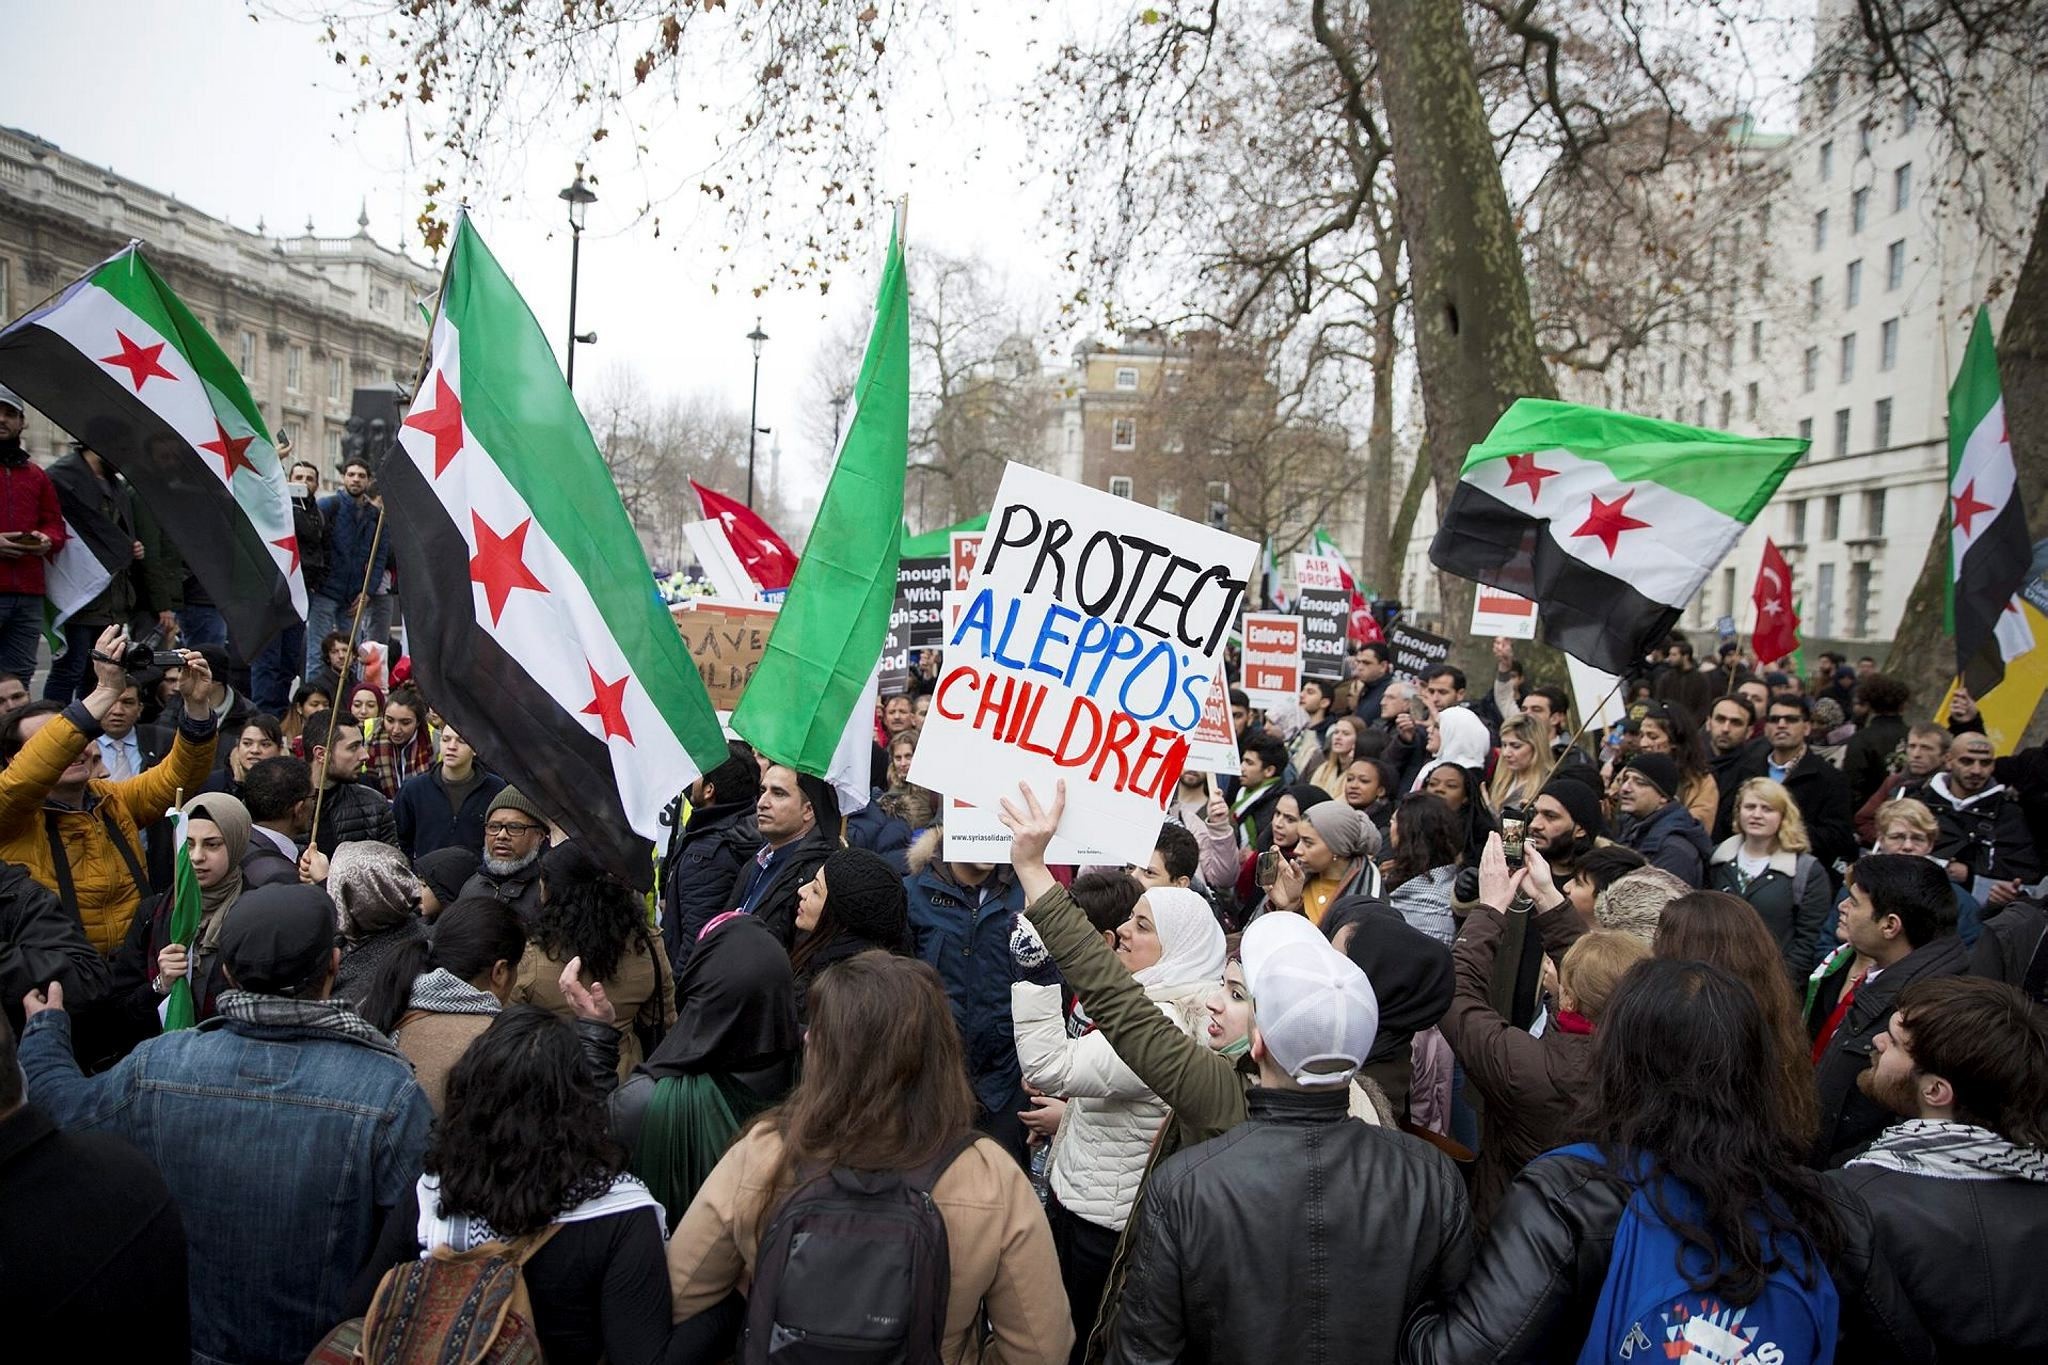 Protesters gathered in London to protest the ongoing violence against civilians in Syria's Aleppo, December 17, 2016. (AA Photo)